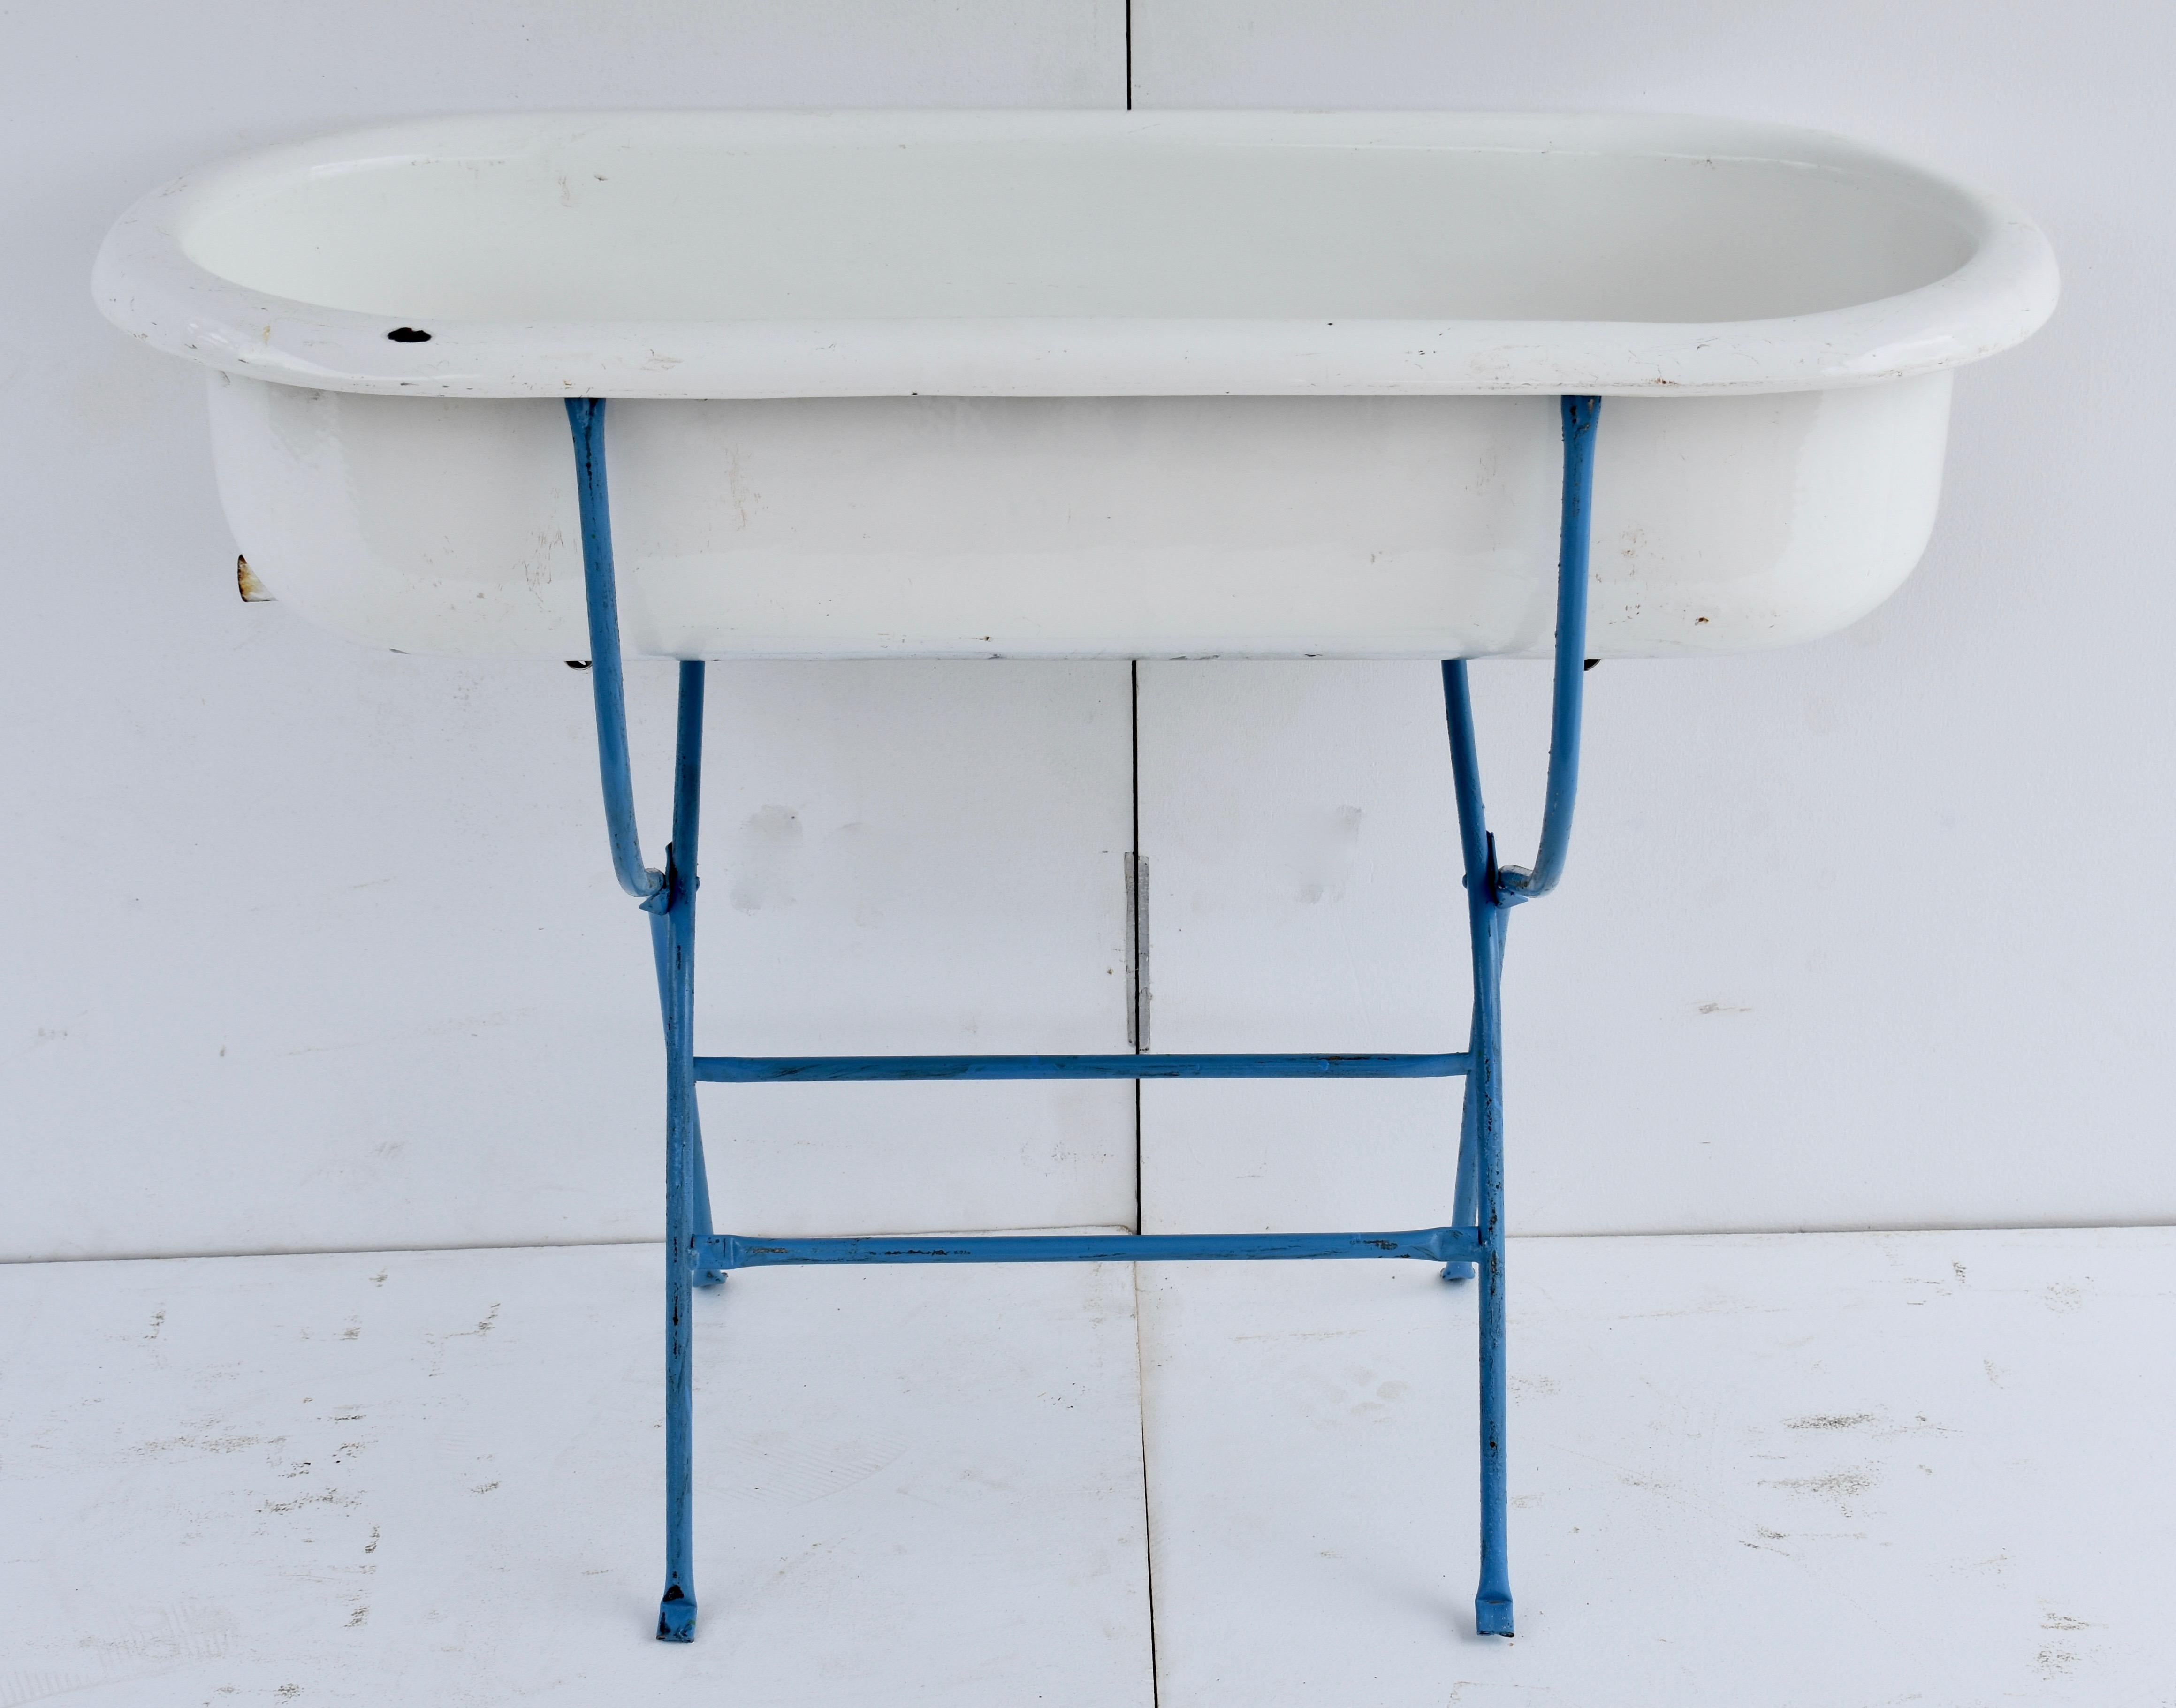 This is a delightful porcelain enameled baby bath by Zim oF Hungary, mounted on a repainted folding wrought iron stand. When summer returns it would be great filled with bottles of beer or wine on ice, or perfect as a planter or other outdoor